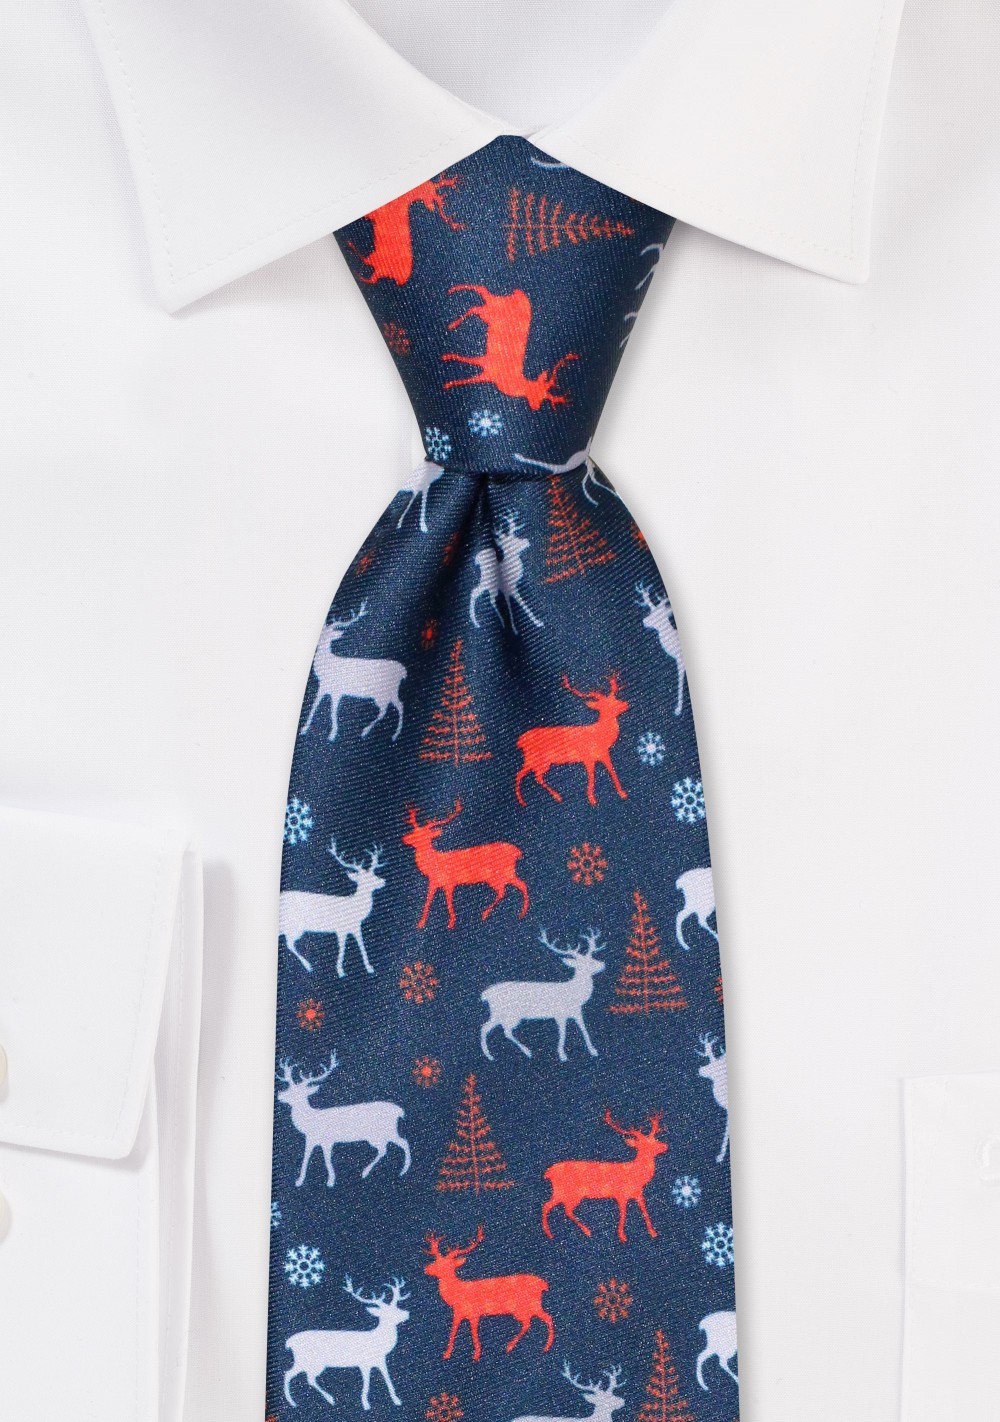 Winterland Kids Tie in Teal and Red